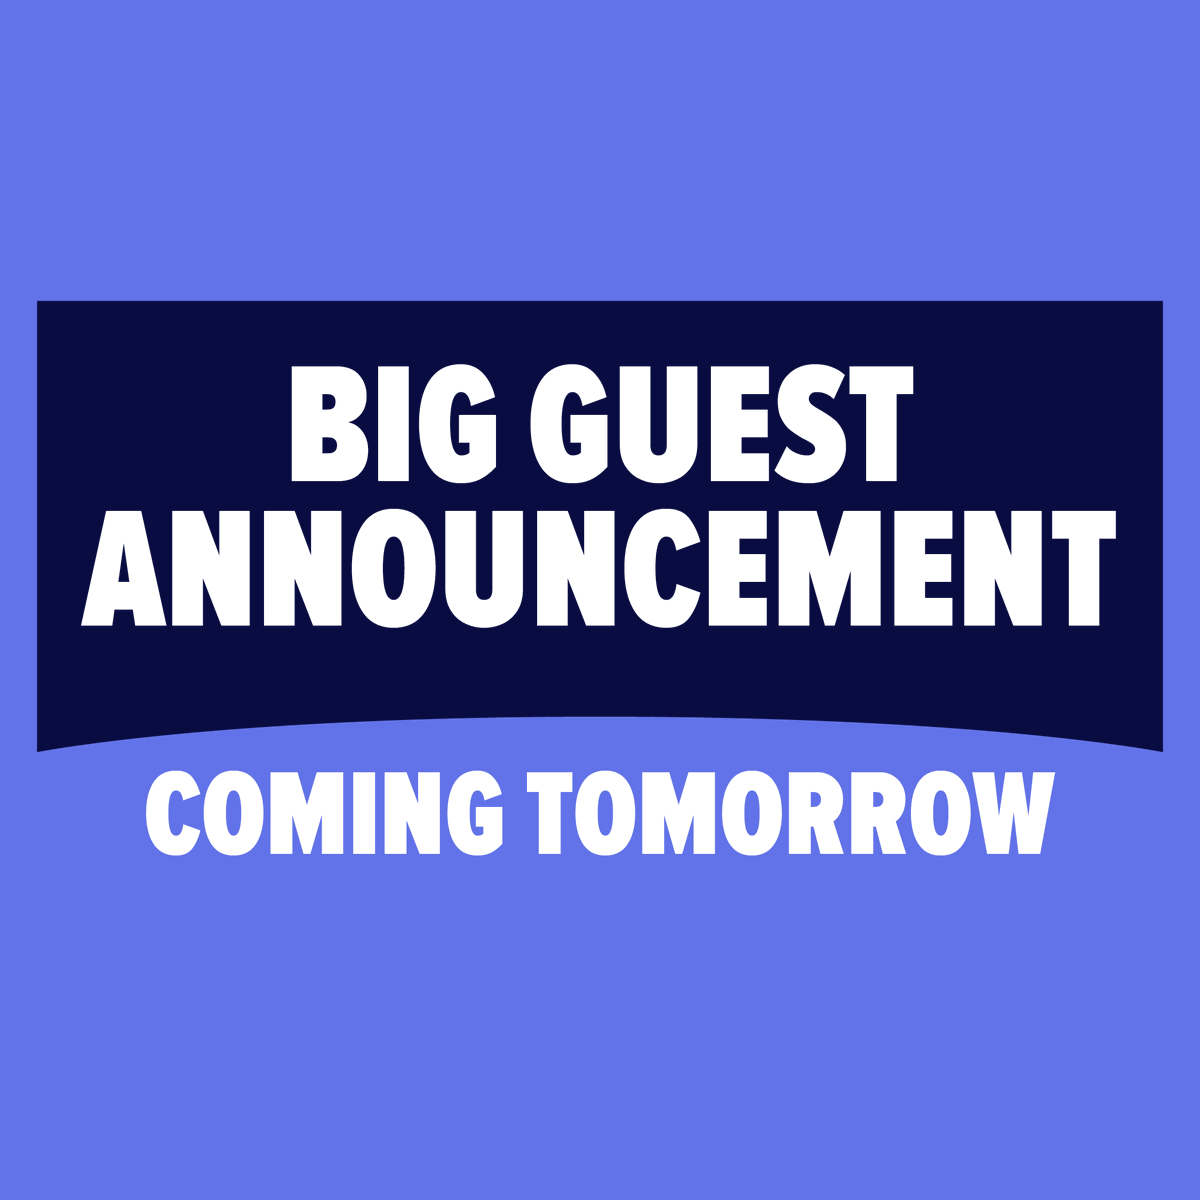 Dallas, we have a thrilling guest announcement coming tomorrow. Think you know who it is? Dish out your ideas below before we serve up the answer tomorrow. Get your show tickets now: spr.ly/6018jUj5j #FANEXPODallas #dallas #texas #dfw #dallastexas #dallastx #arlington